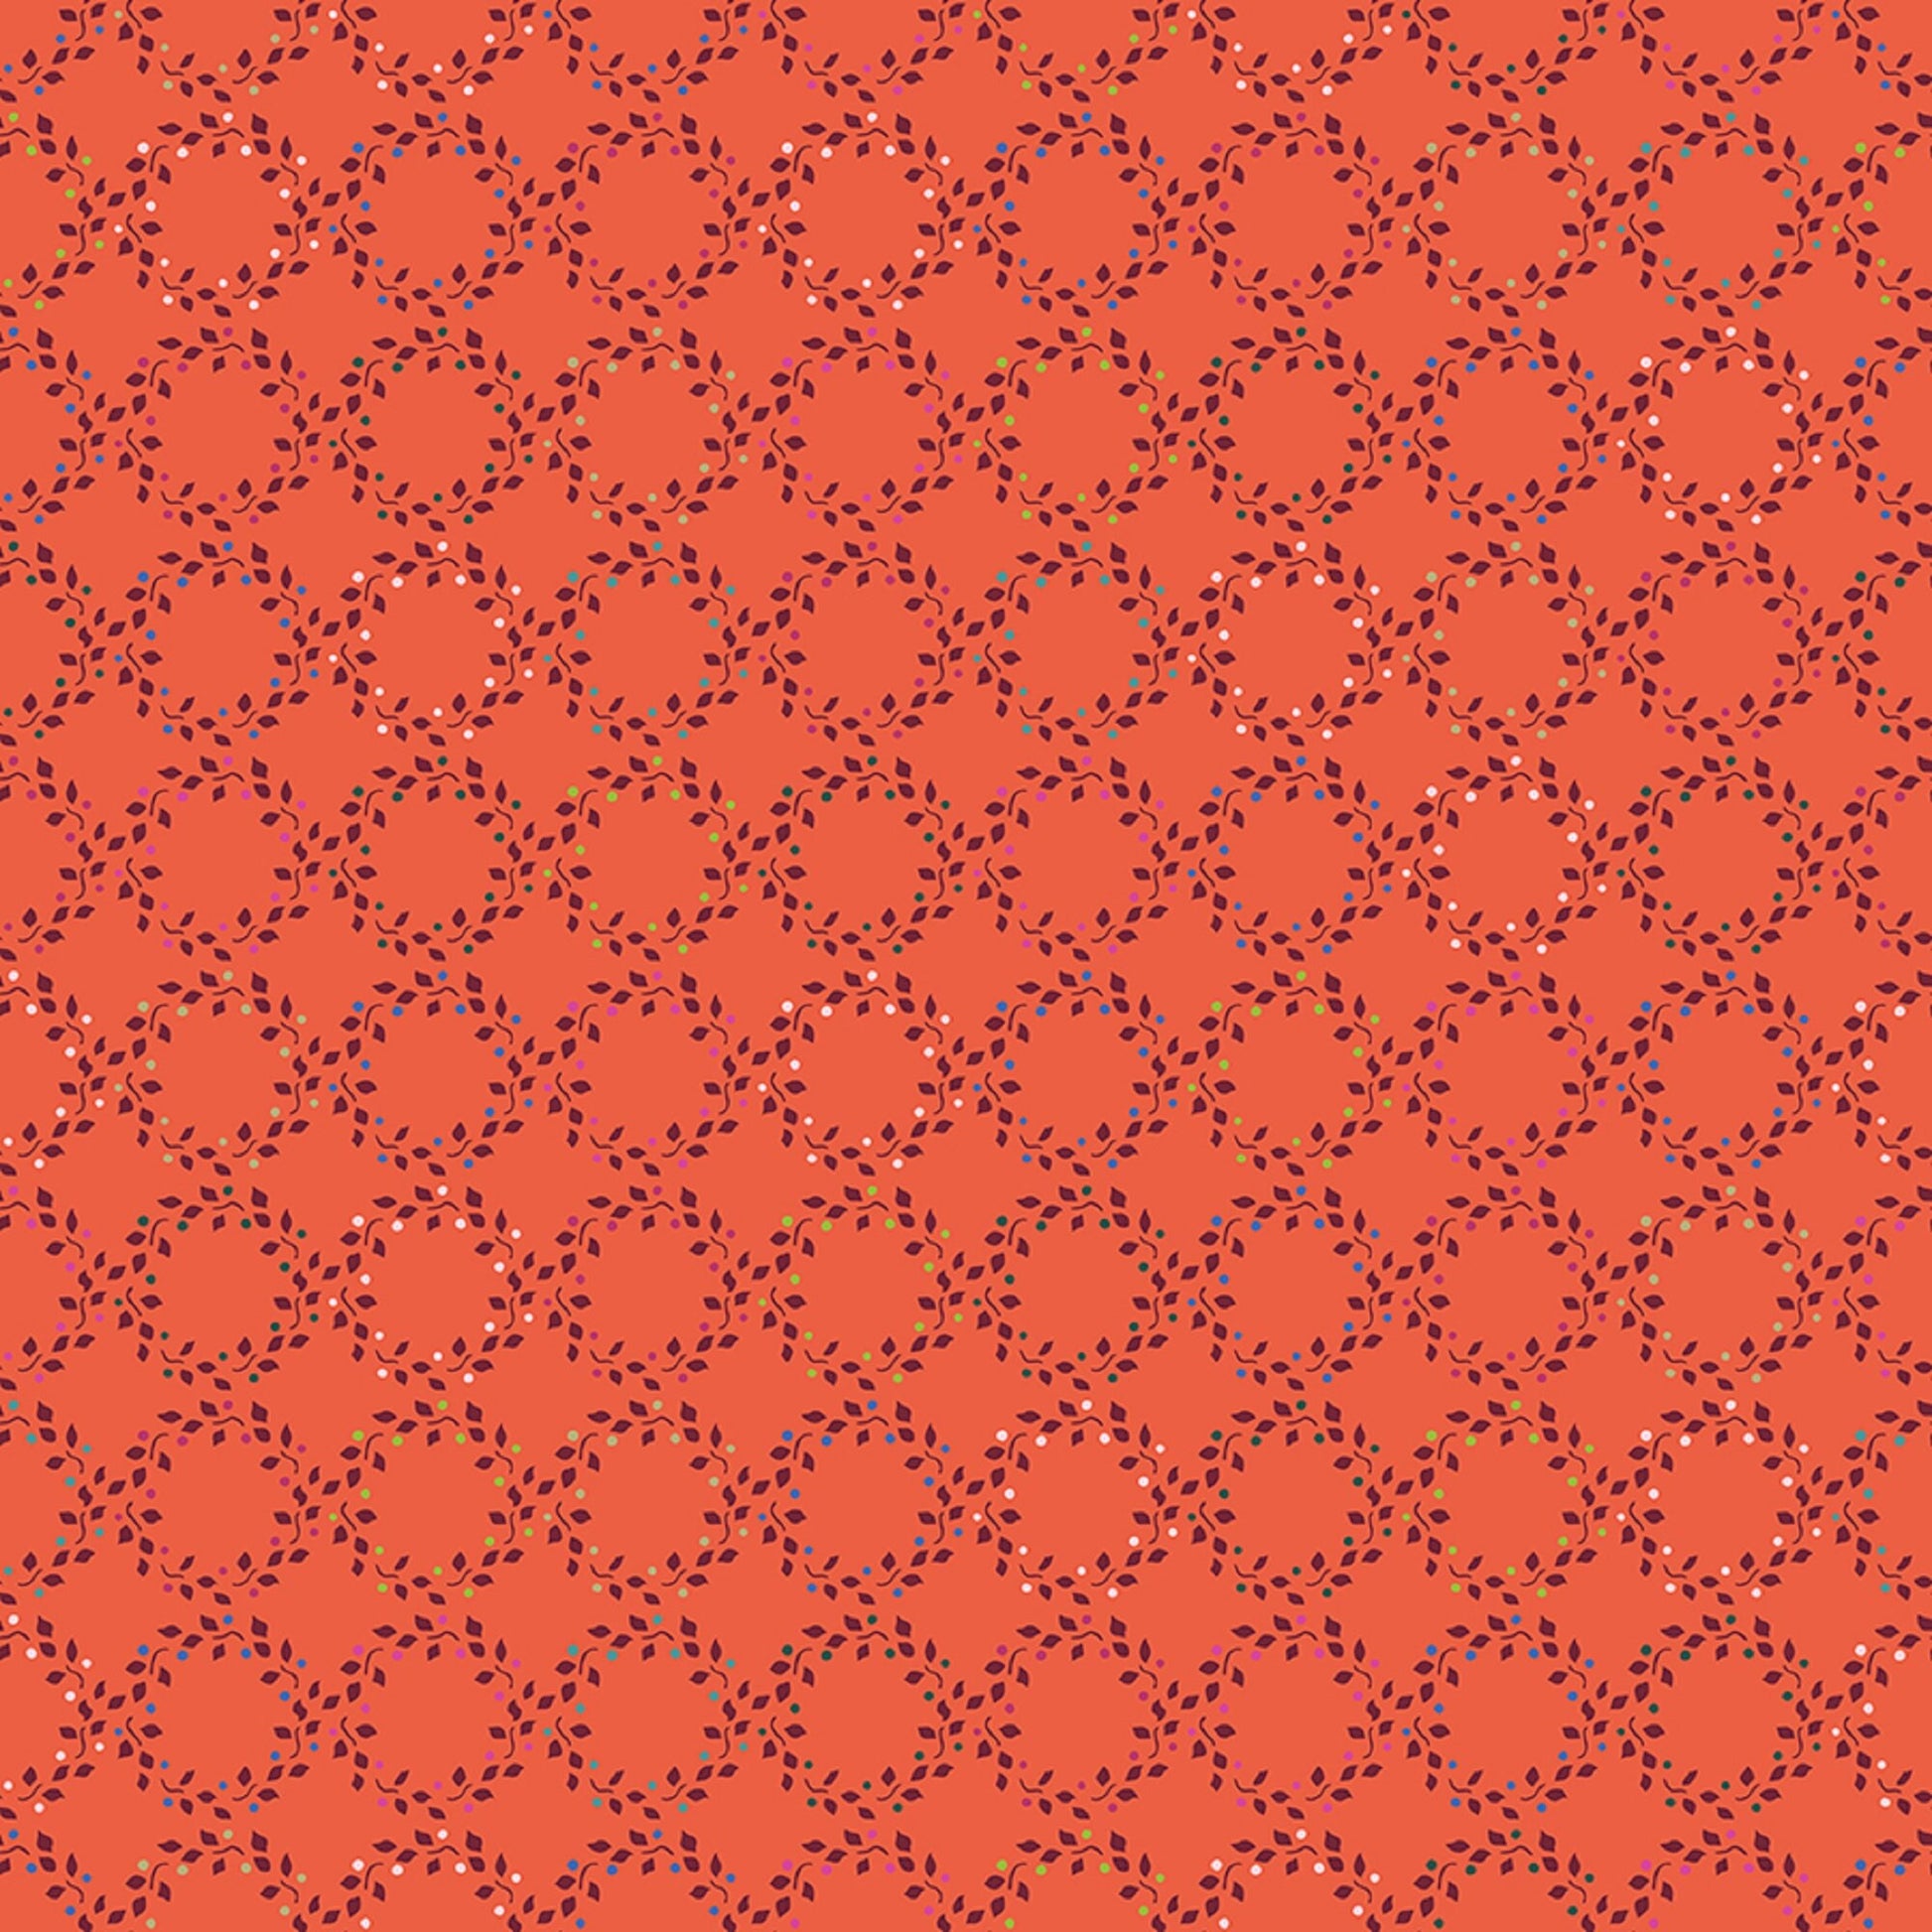 Coronet Coral Swatch Book Kathy Doughty Figo Fabrics 100% Quilters Cotton 90721 56 Fabric Fetish